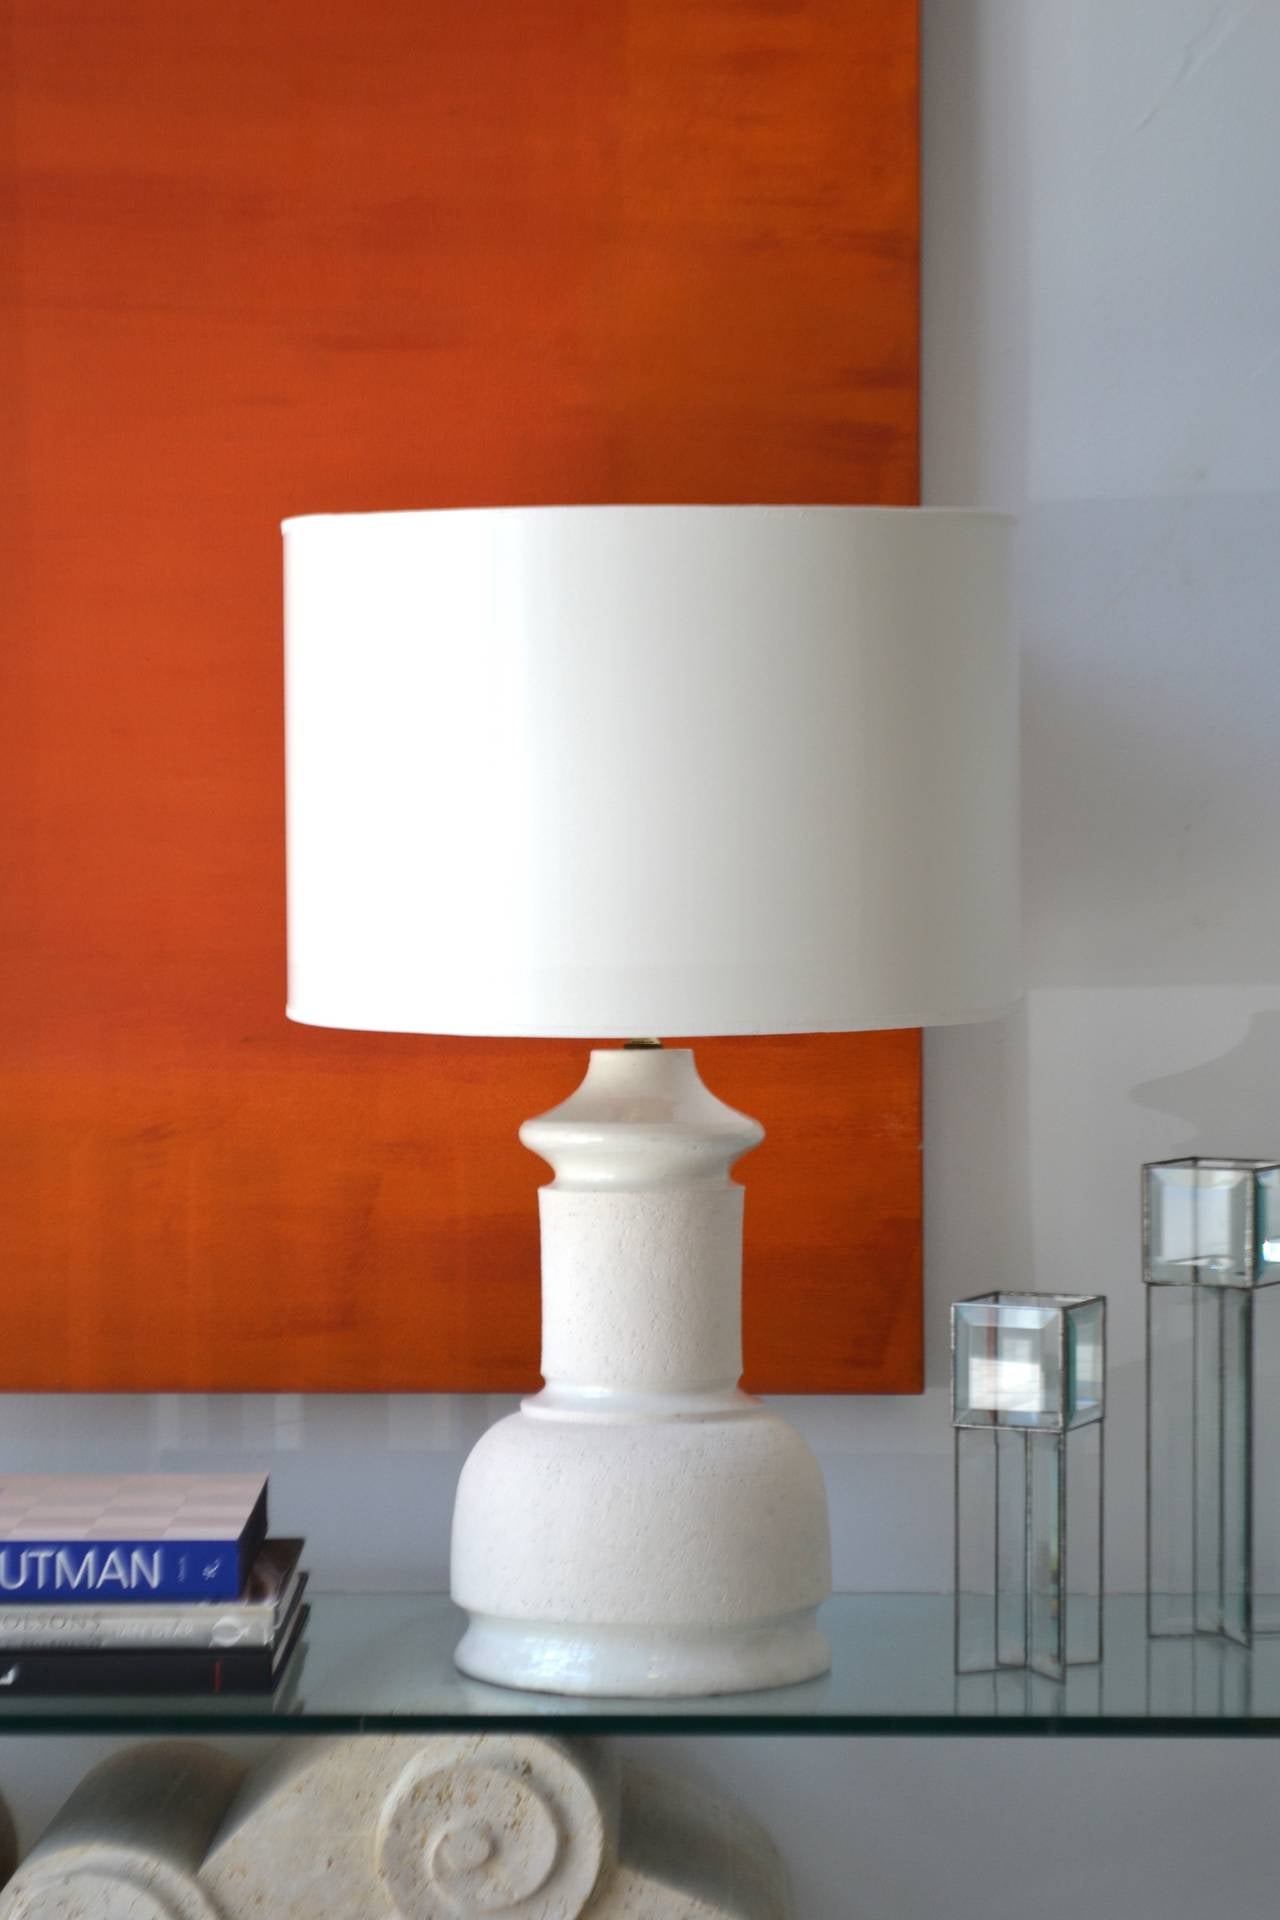 Stunning Mid-Century Modern white ceramic table lamp, Italy, circa 1960s. This strikingly graphic lamp is designed of alternating glazed and unglazed undulating ceramic bands. Sold without shade.

Measurements:

Overall height from base to top